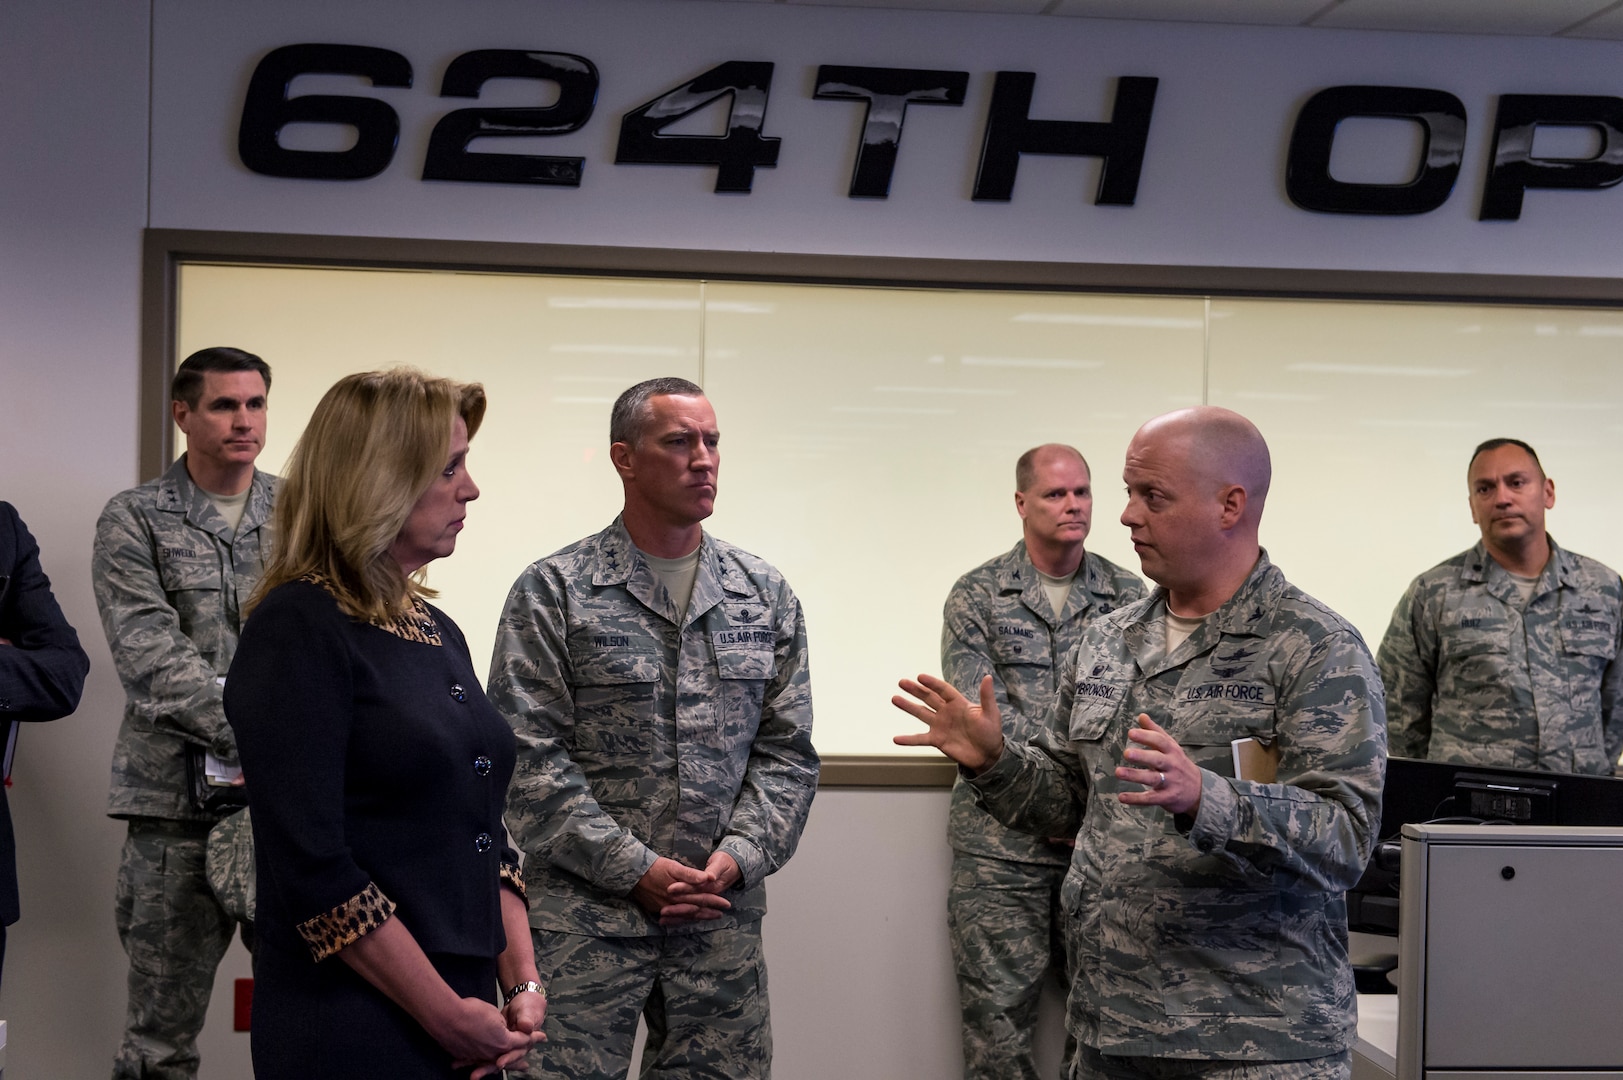 Secretary of the Air Force Deborah Lee James receives a briefing from Col. Michael Dombrowski, 624th Operations Center commander during a visit to JBSA - Lackland Jan 5. James and leaders of 24th and 25th Air Force discussed a series of cyber and global ISR initiatives focused on industry partnerships and innovation. (US Air Force photo by MSgt Luke Thelen)